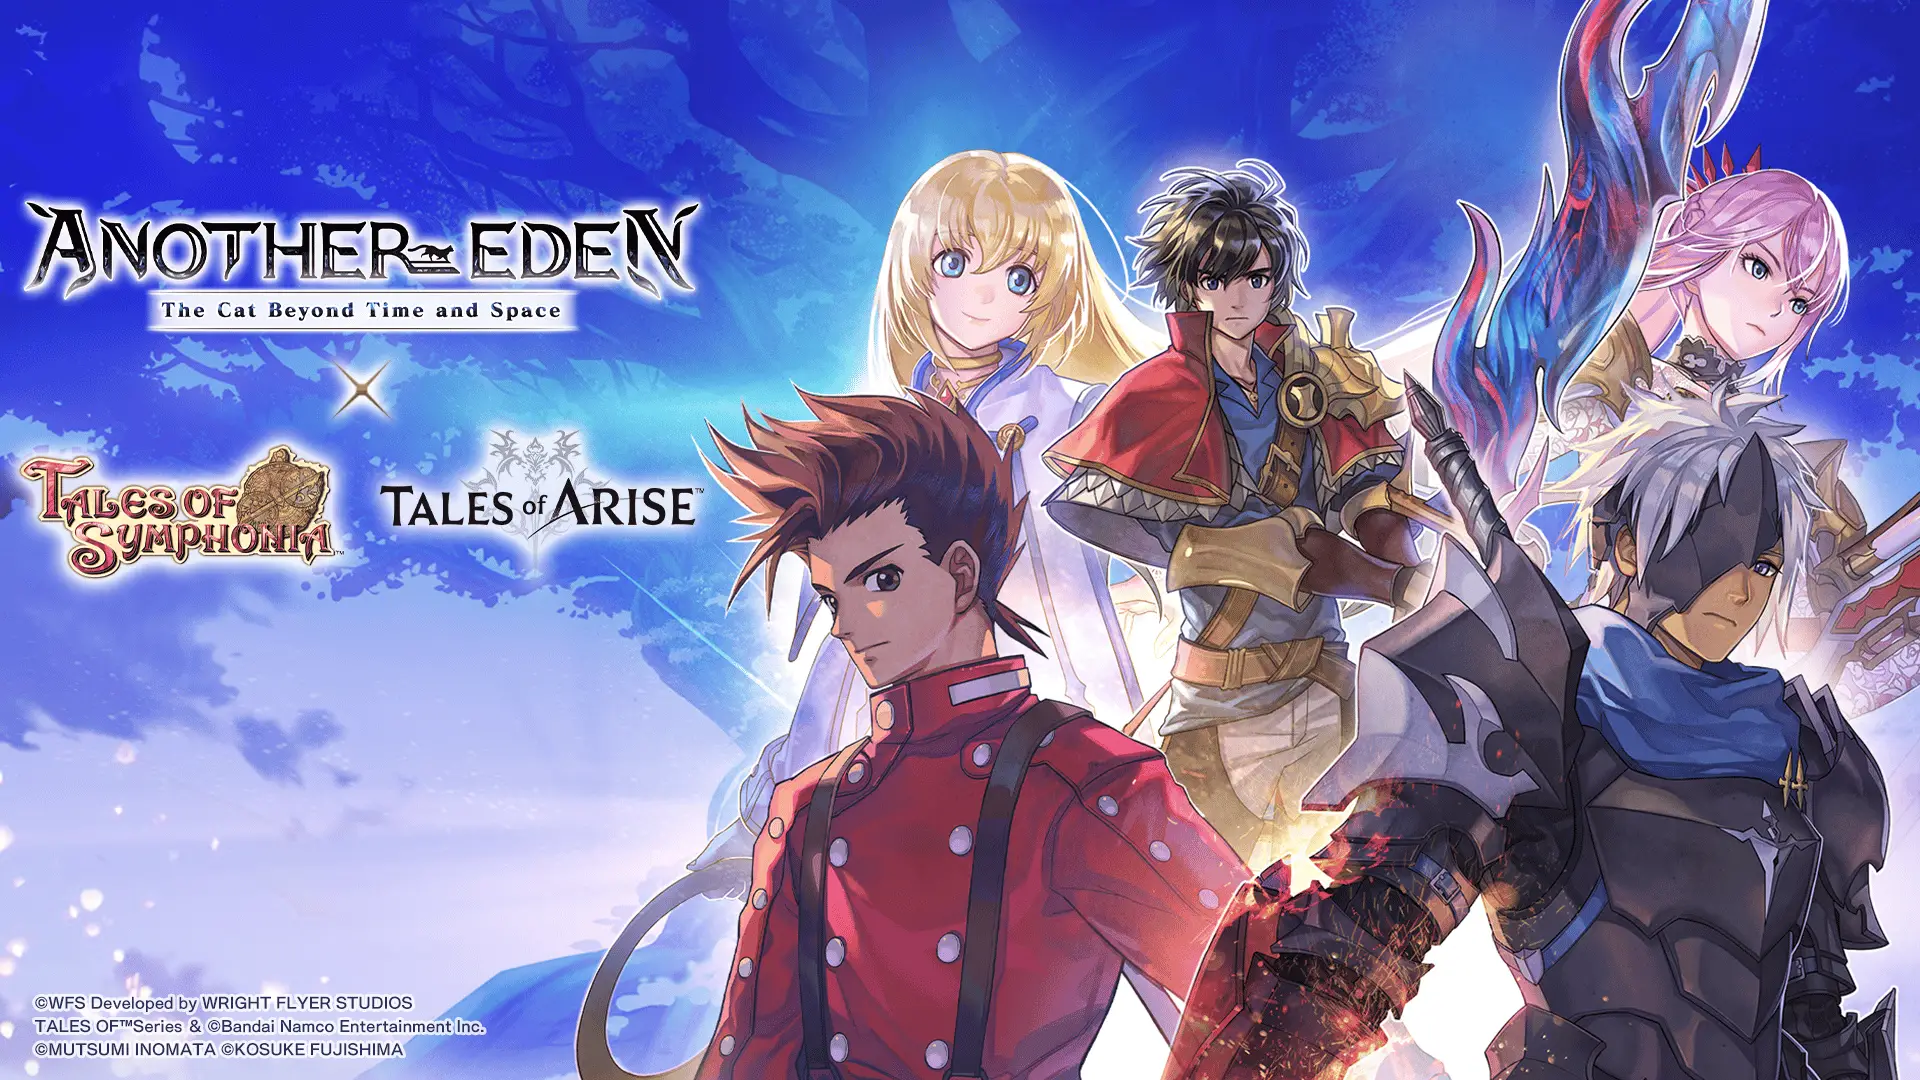 Another Eden Announces Tales of Arise & Symphonia Collab; Playable Alphen, Shionne, Colette & Lloyd, Skits, Owl-Finding & More